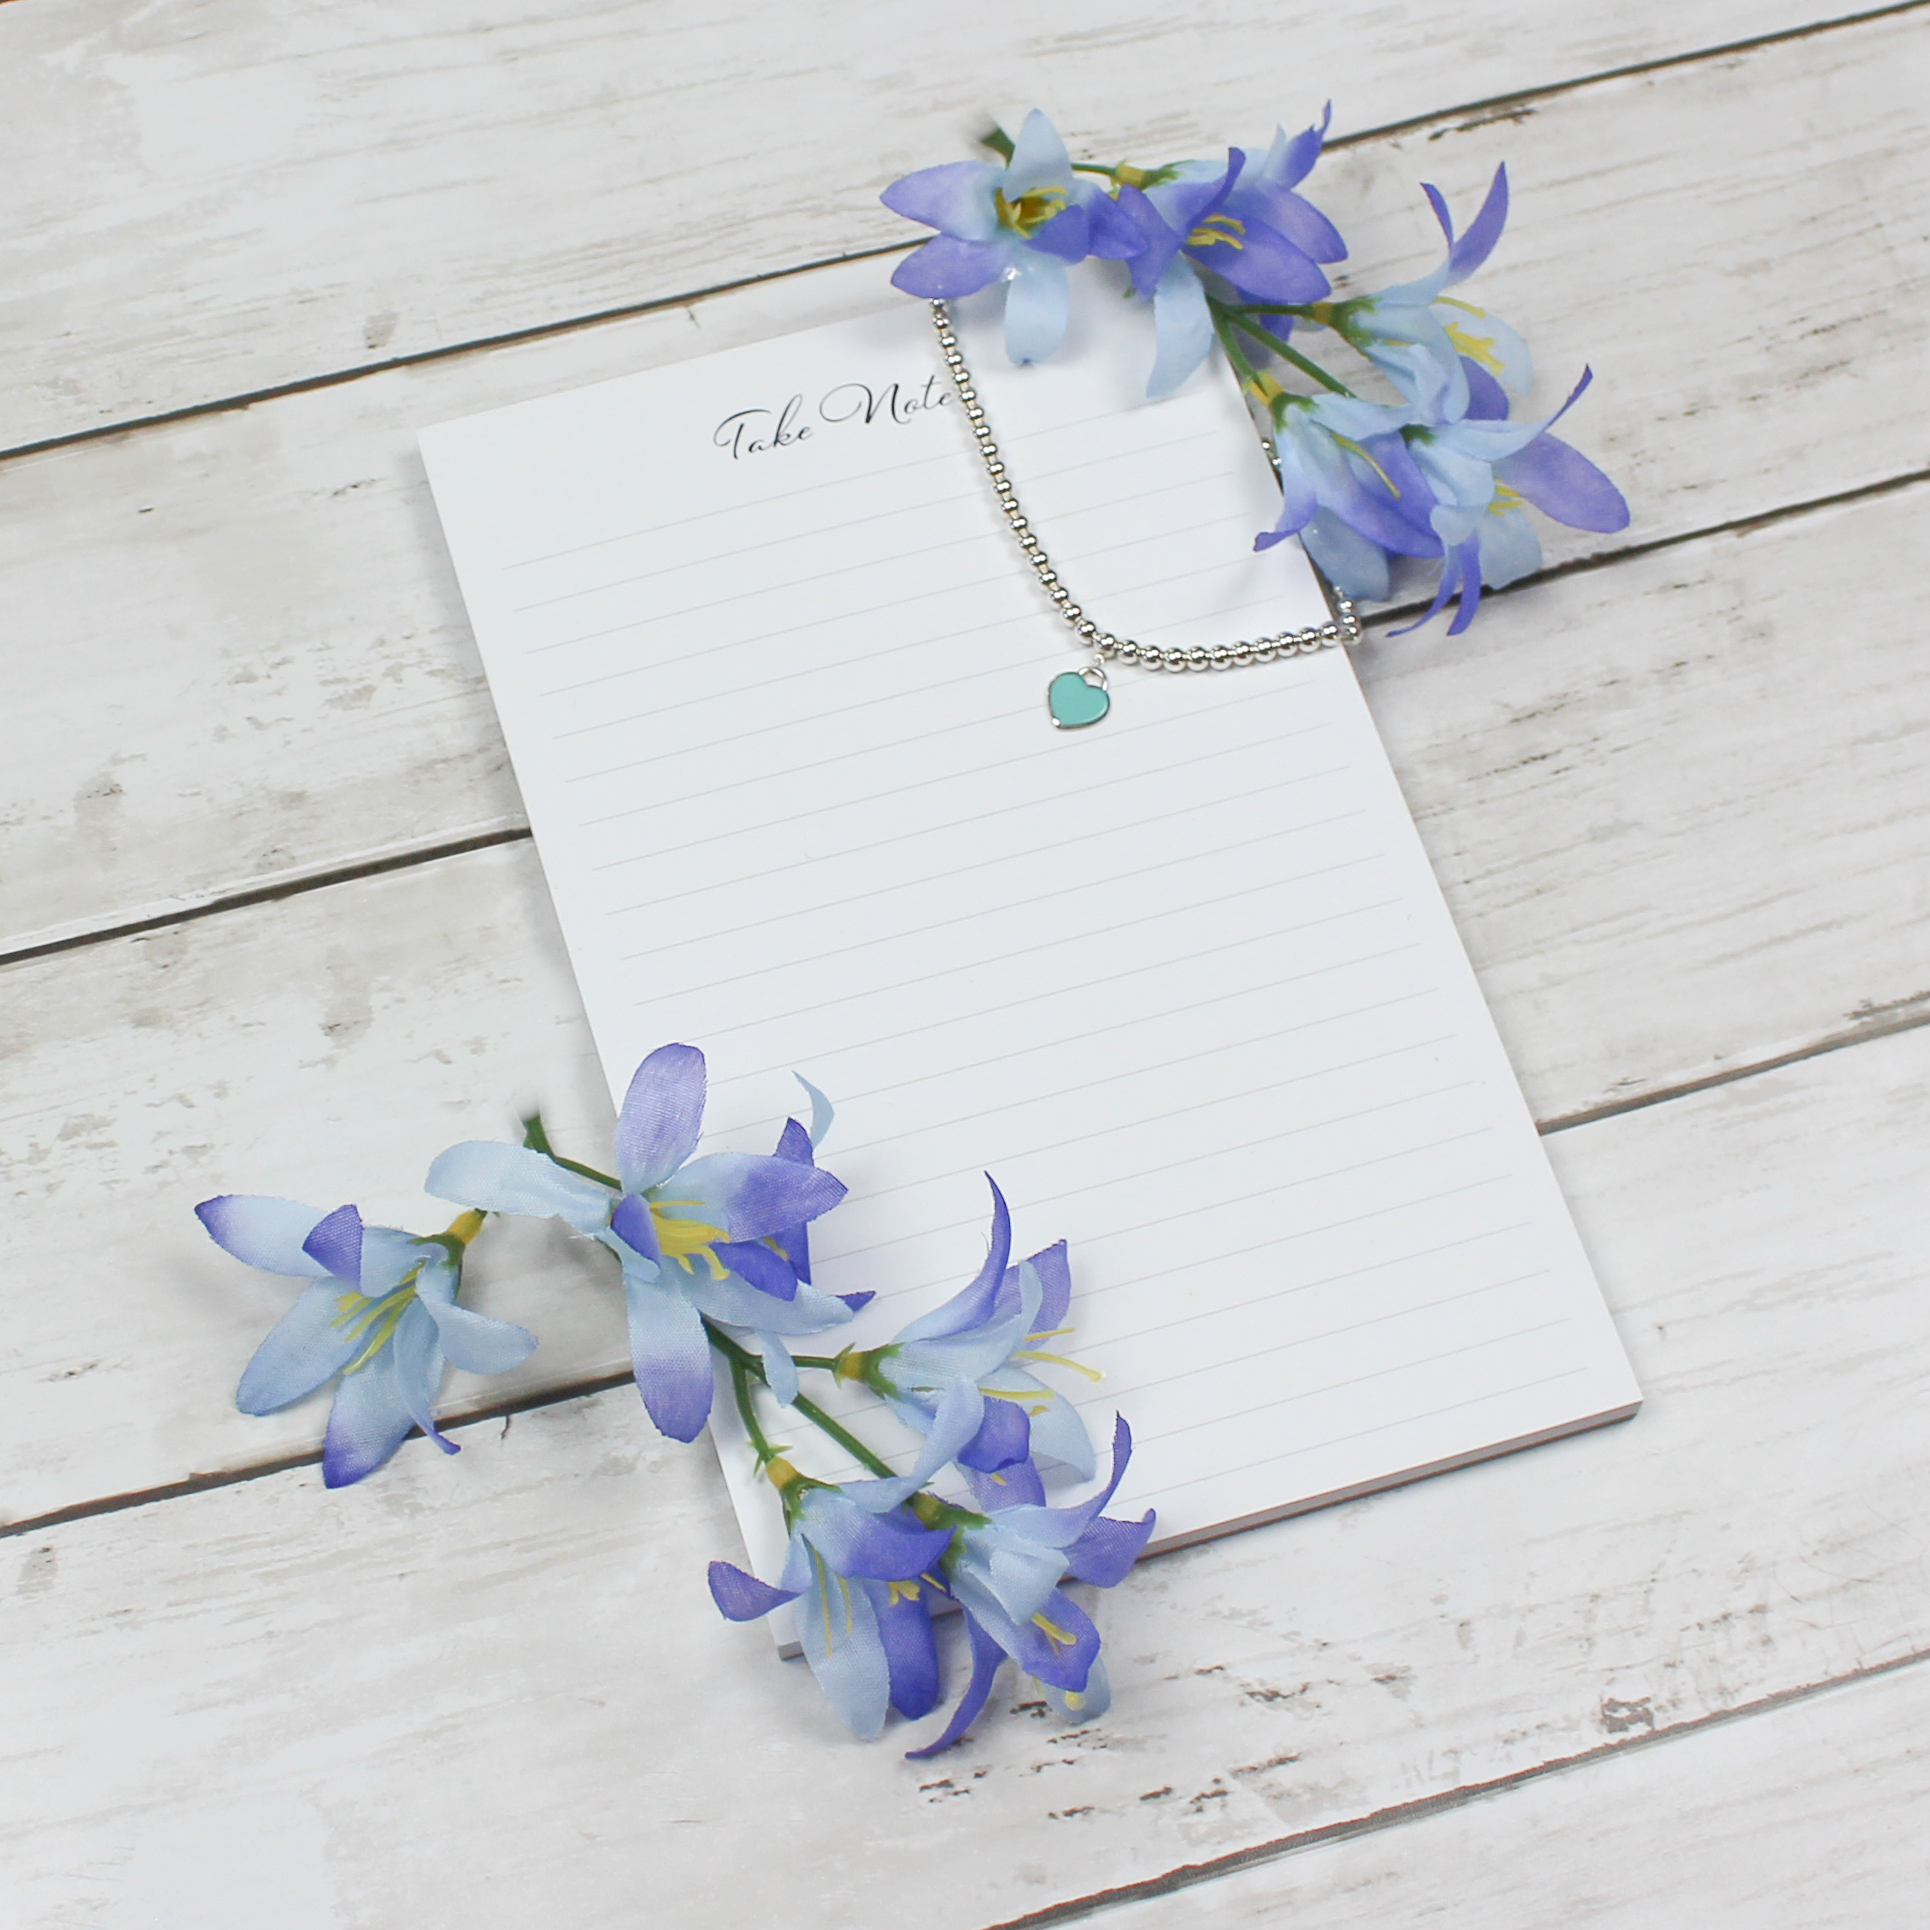 Mini Lined Notepad: Take Note - Scribbly 